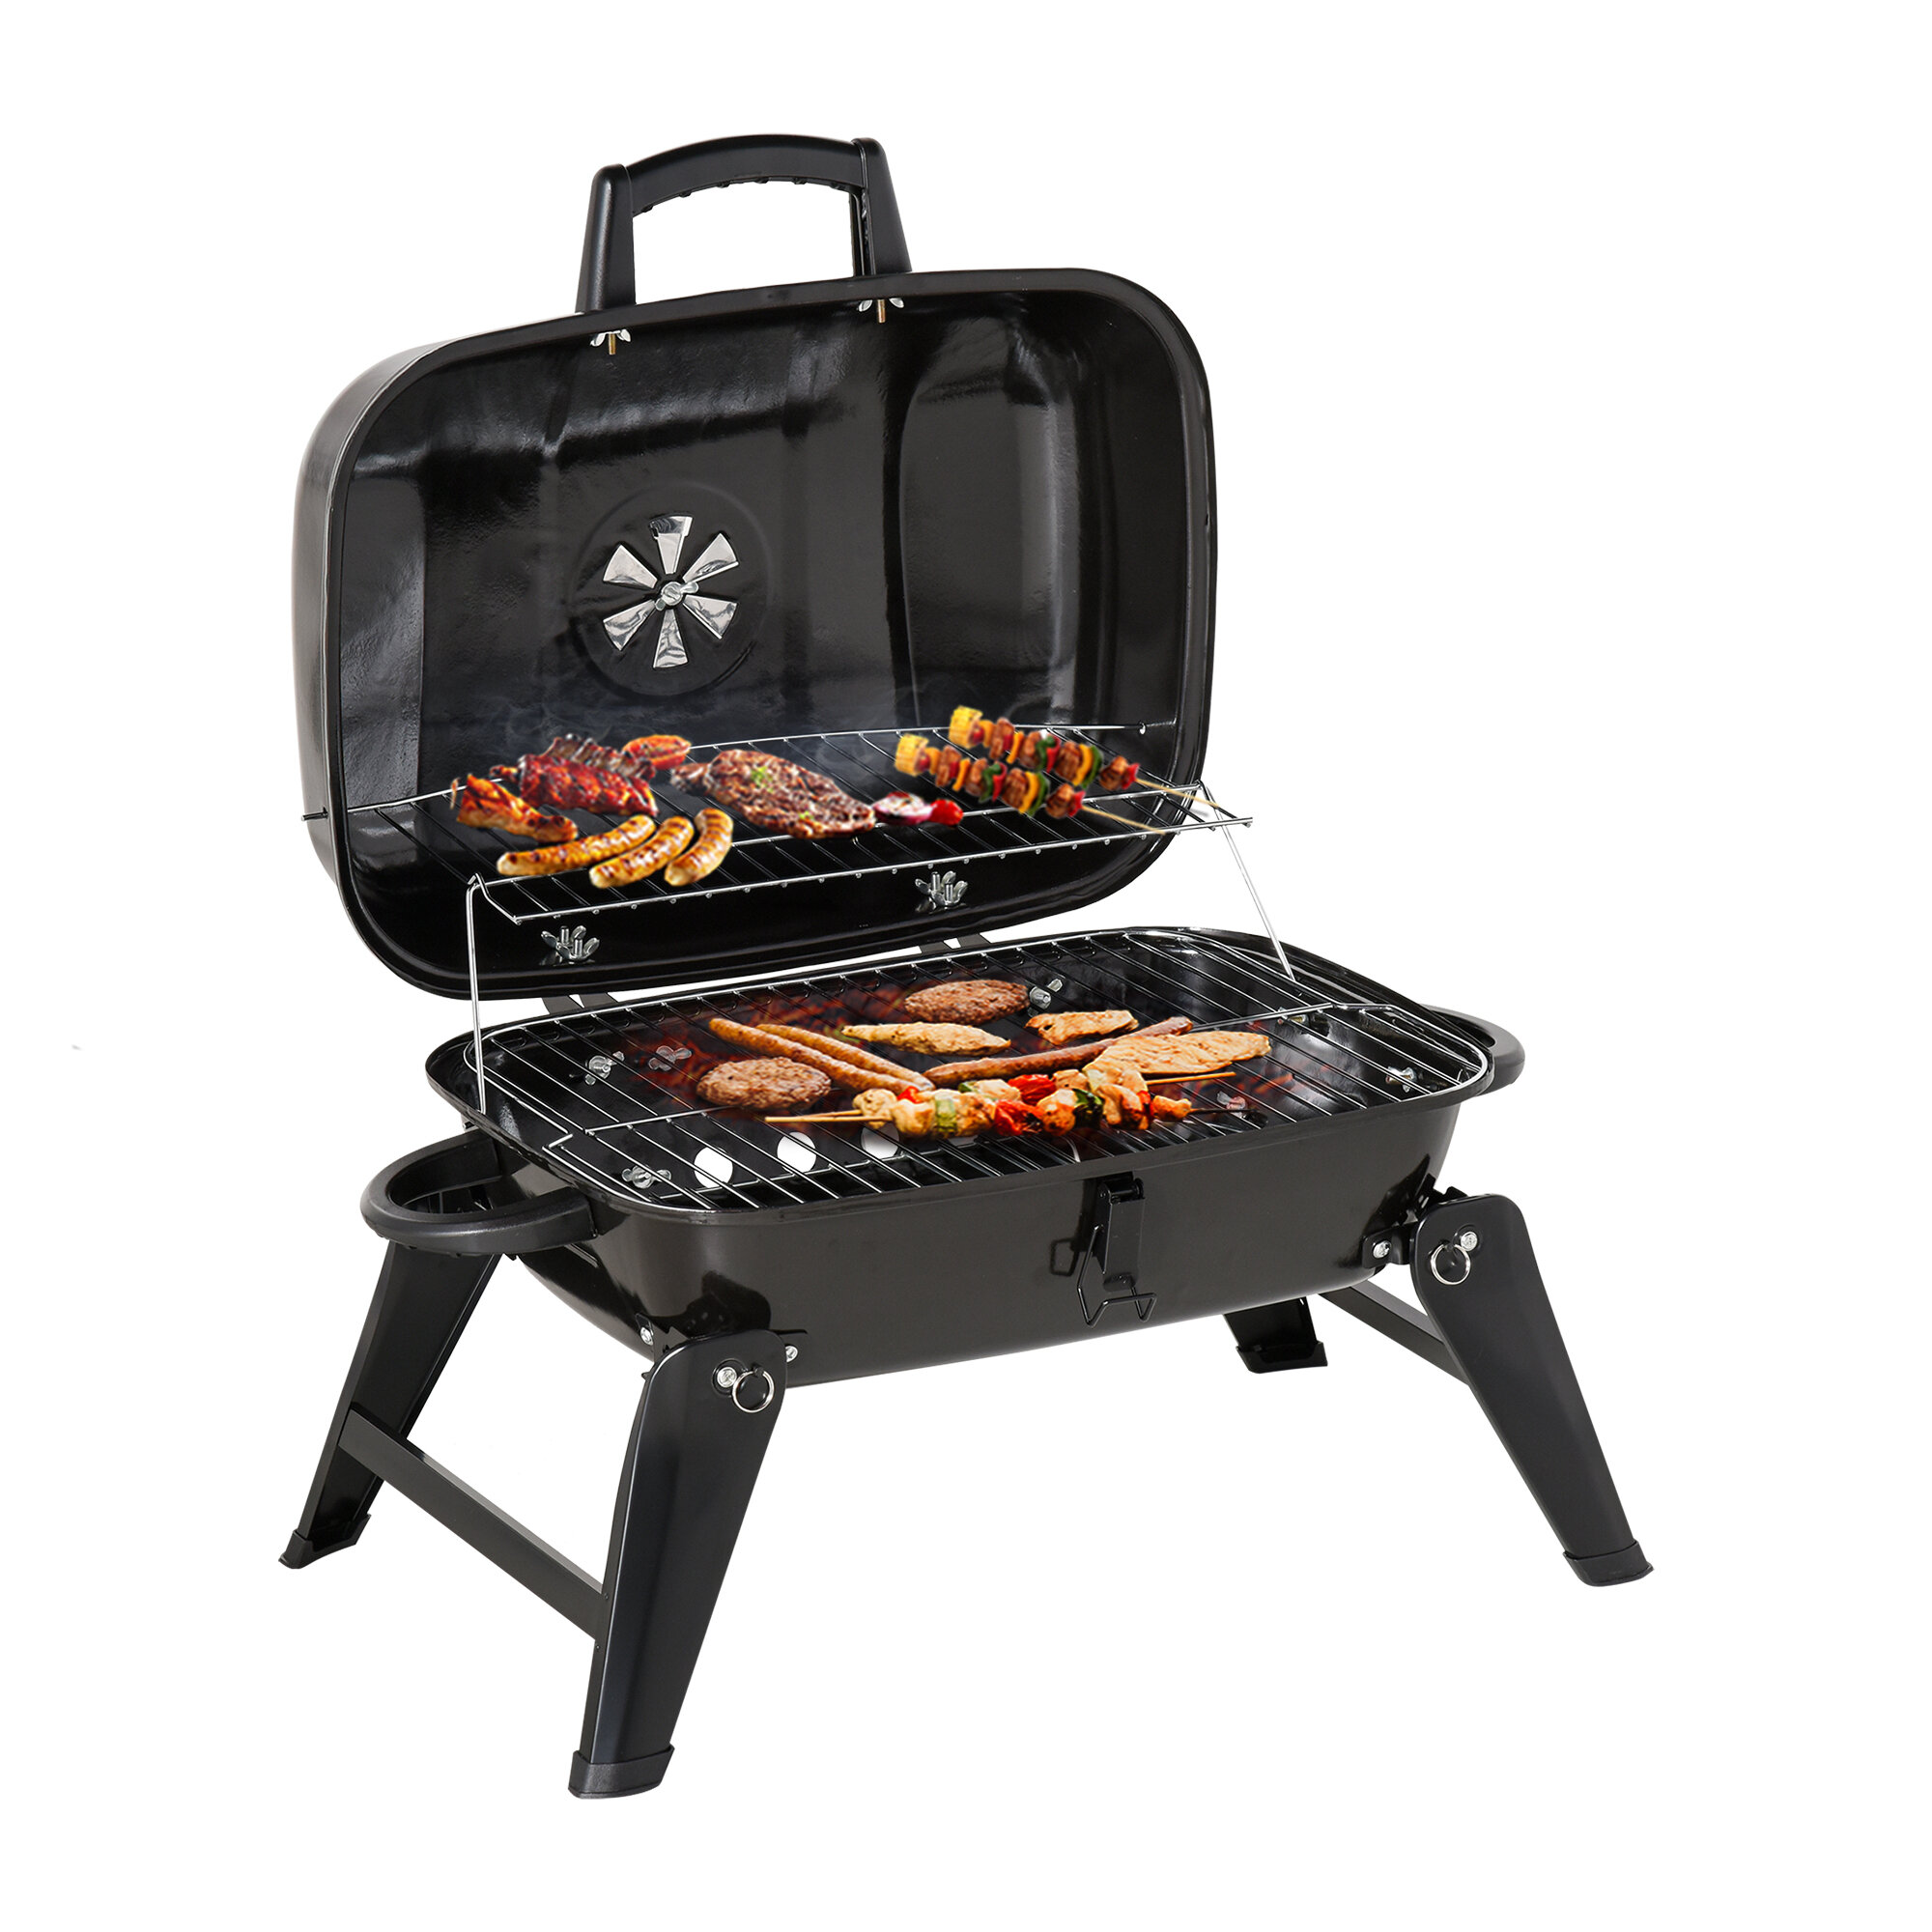 Charcoal Grill Stainless Steel Camping Grill Portable Charcoal Grill 13.7 x 10.6 x 7.8 Barbecue Desk 